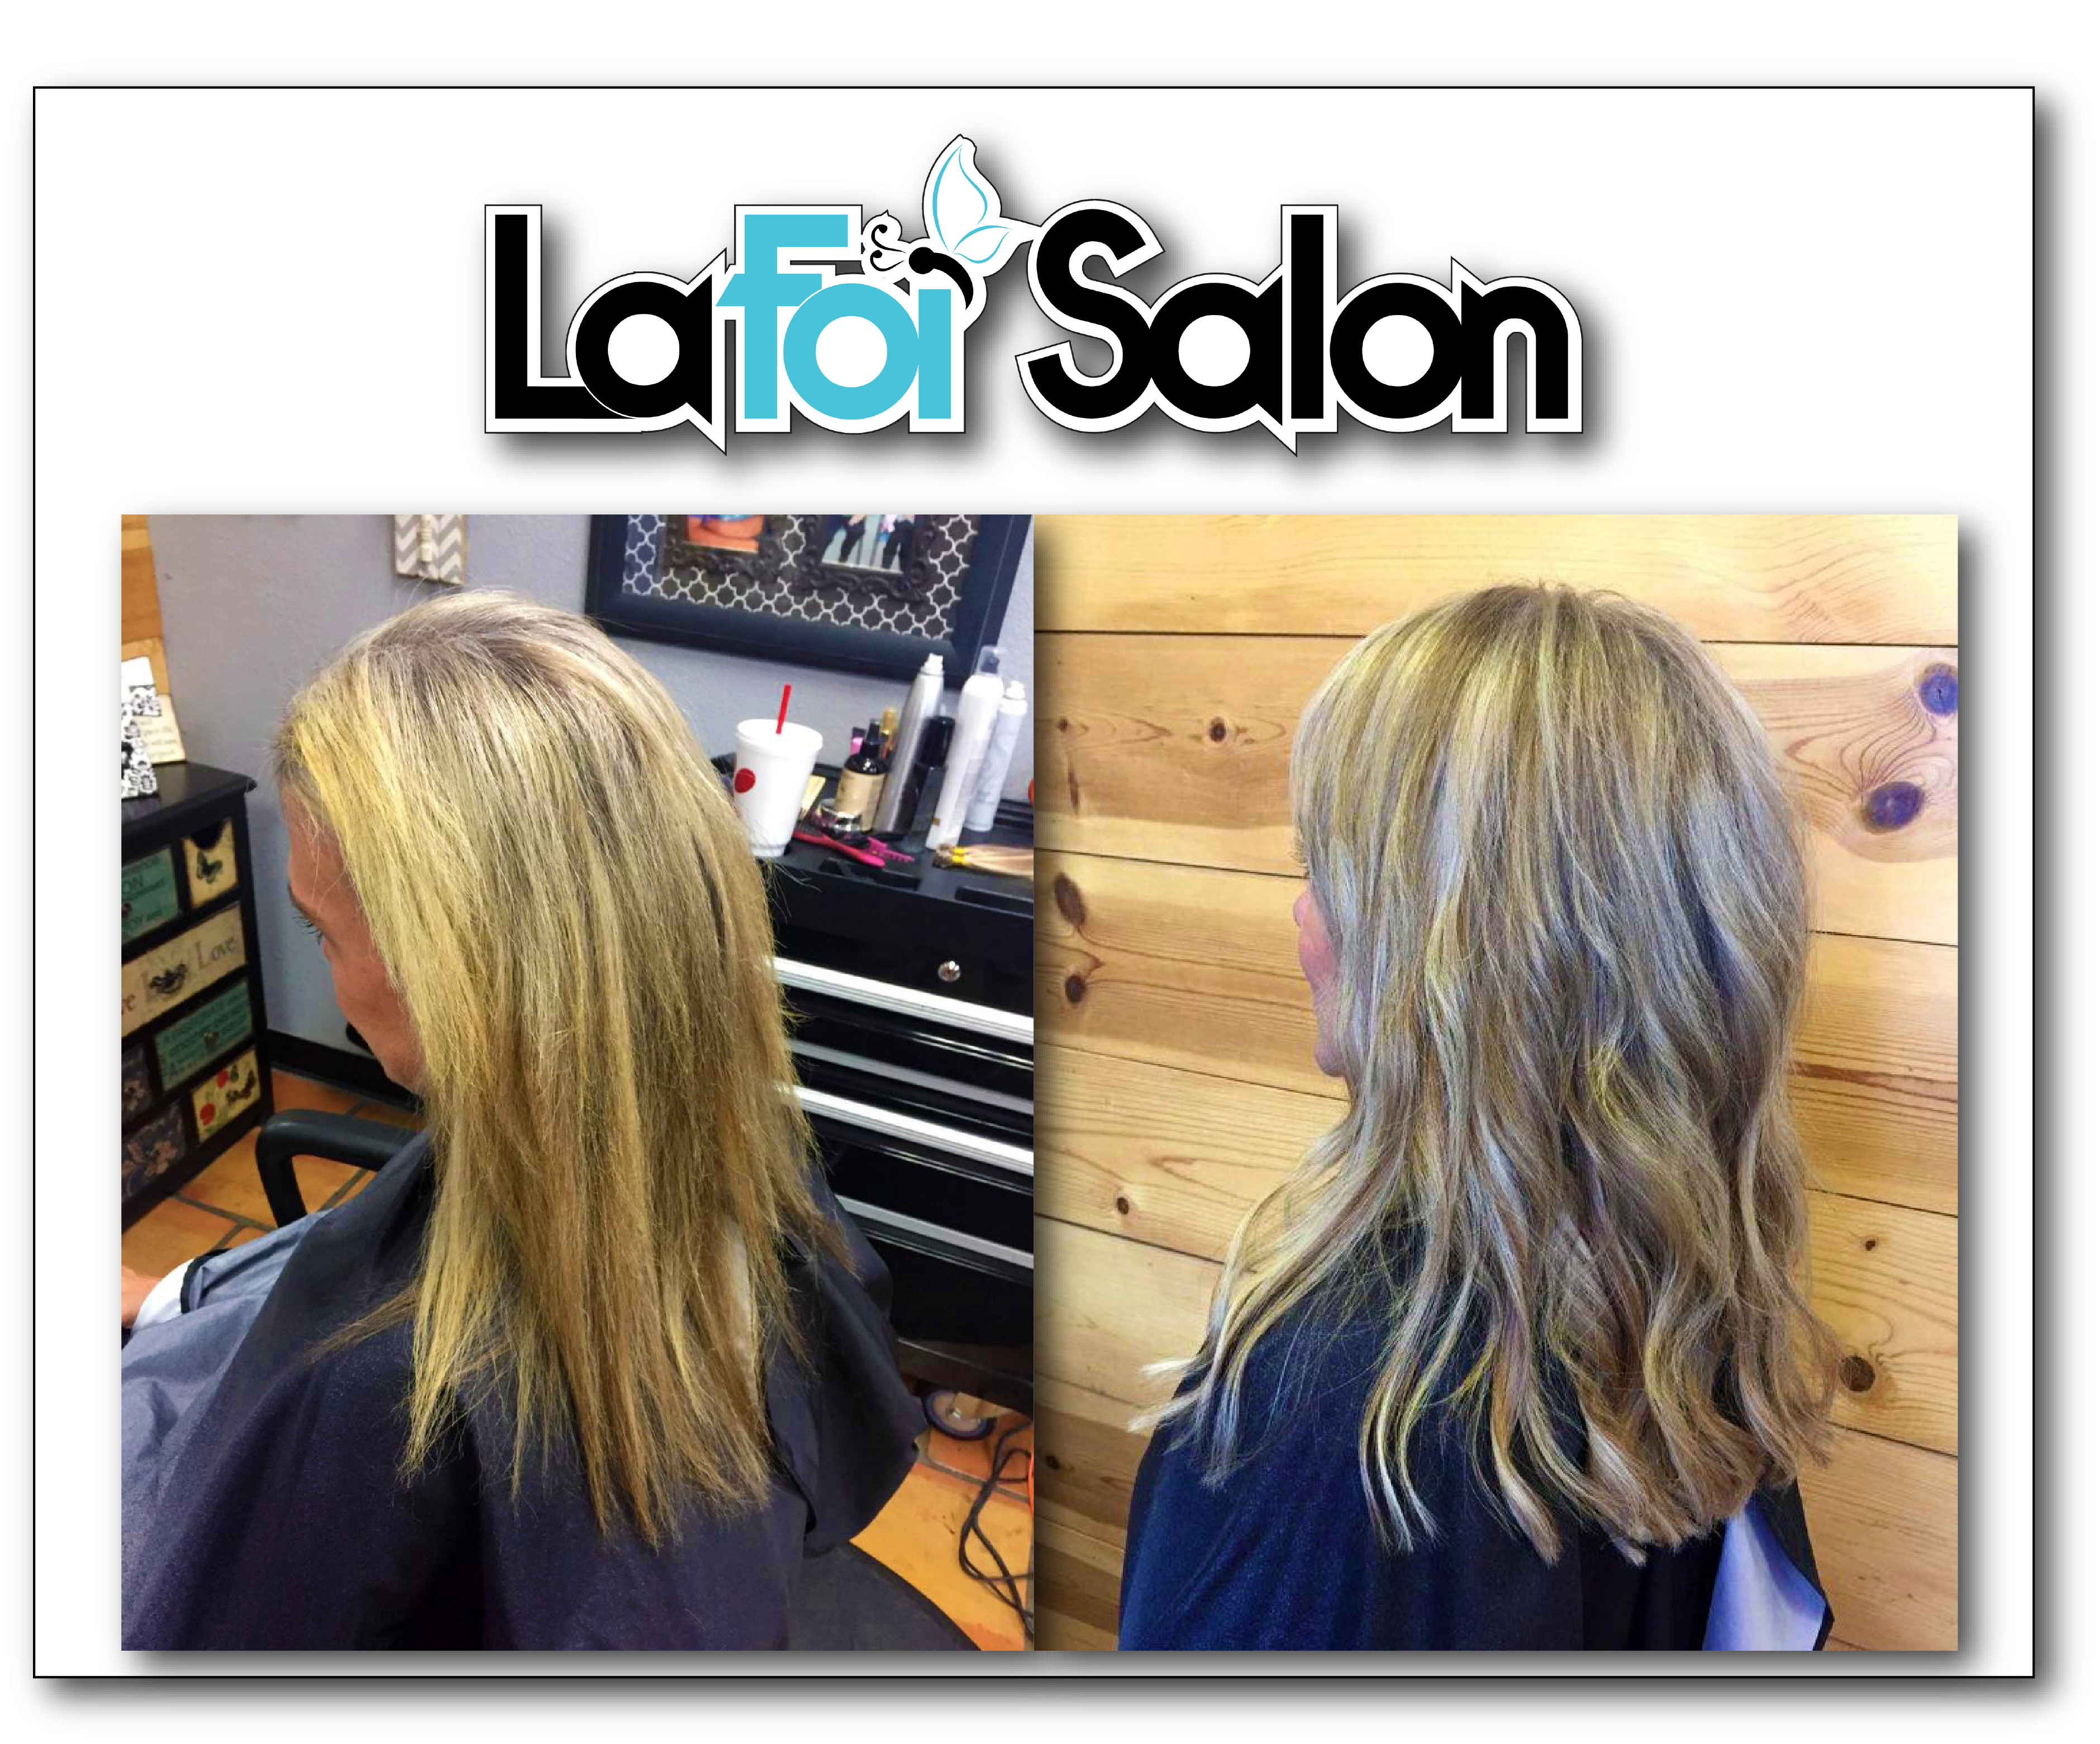 Wanting Some Volume And Length To Your Hair?? Call Us Today To Set Up Your Free Consultation!! (806) 771-4545 https://www.lafoisalon.com/hair-extensions-lubbock-texas.html  hairextensionslubbock  stellarhairextensionslubbock